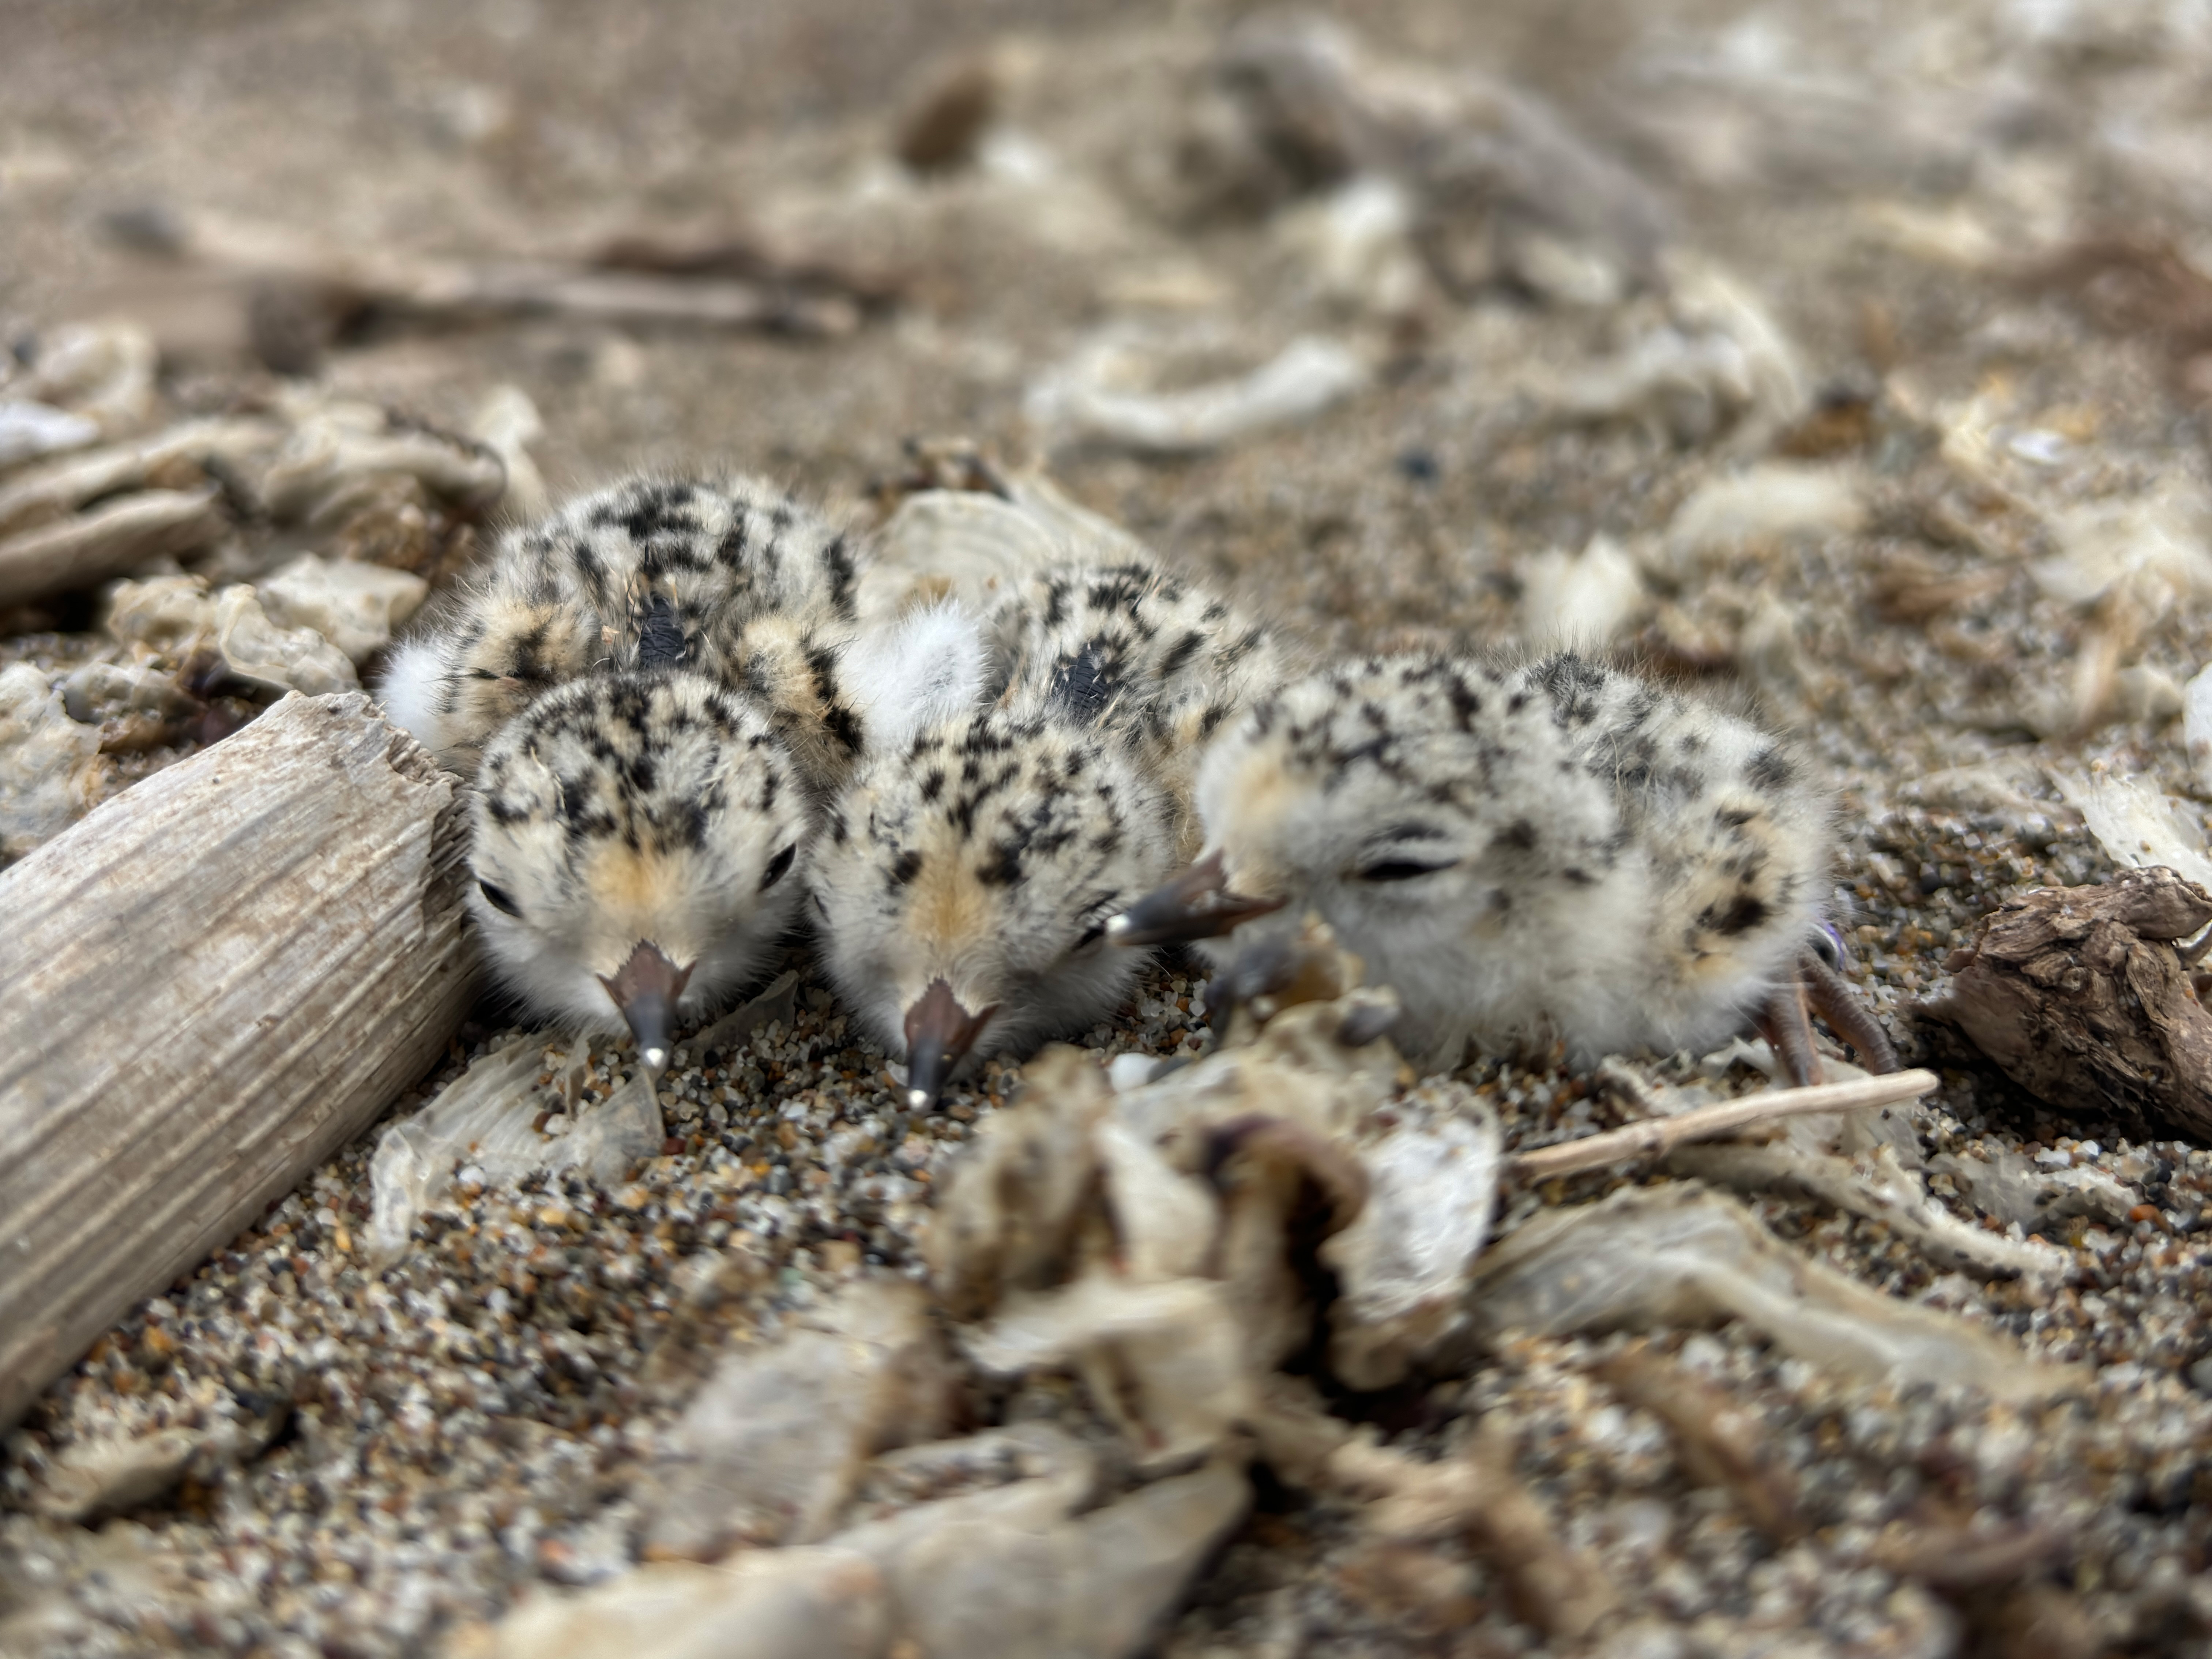 A close-up photo of three small black-speckled, beige-colored chicks on a sandy beach among small pieces of driftwood.